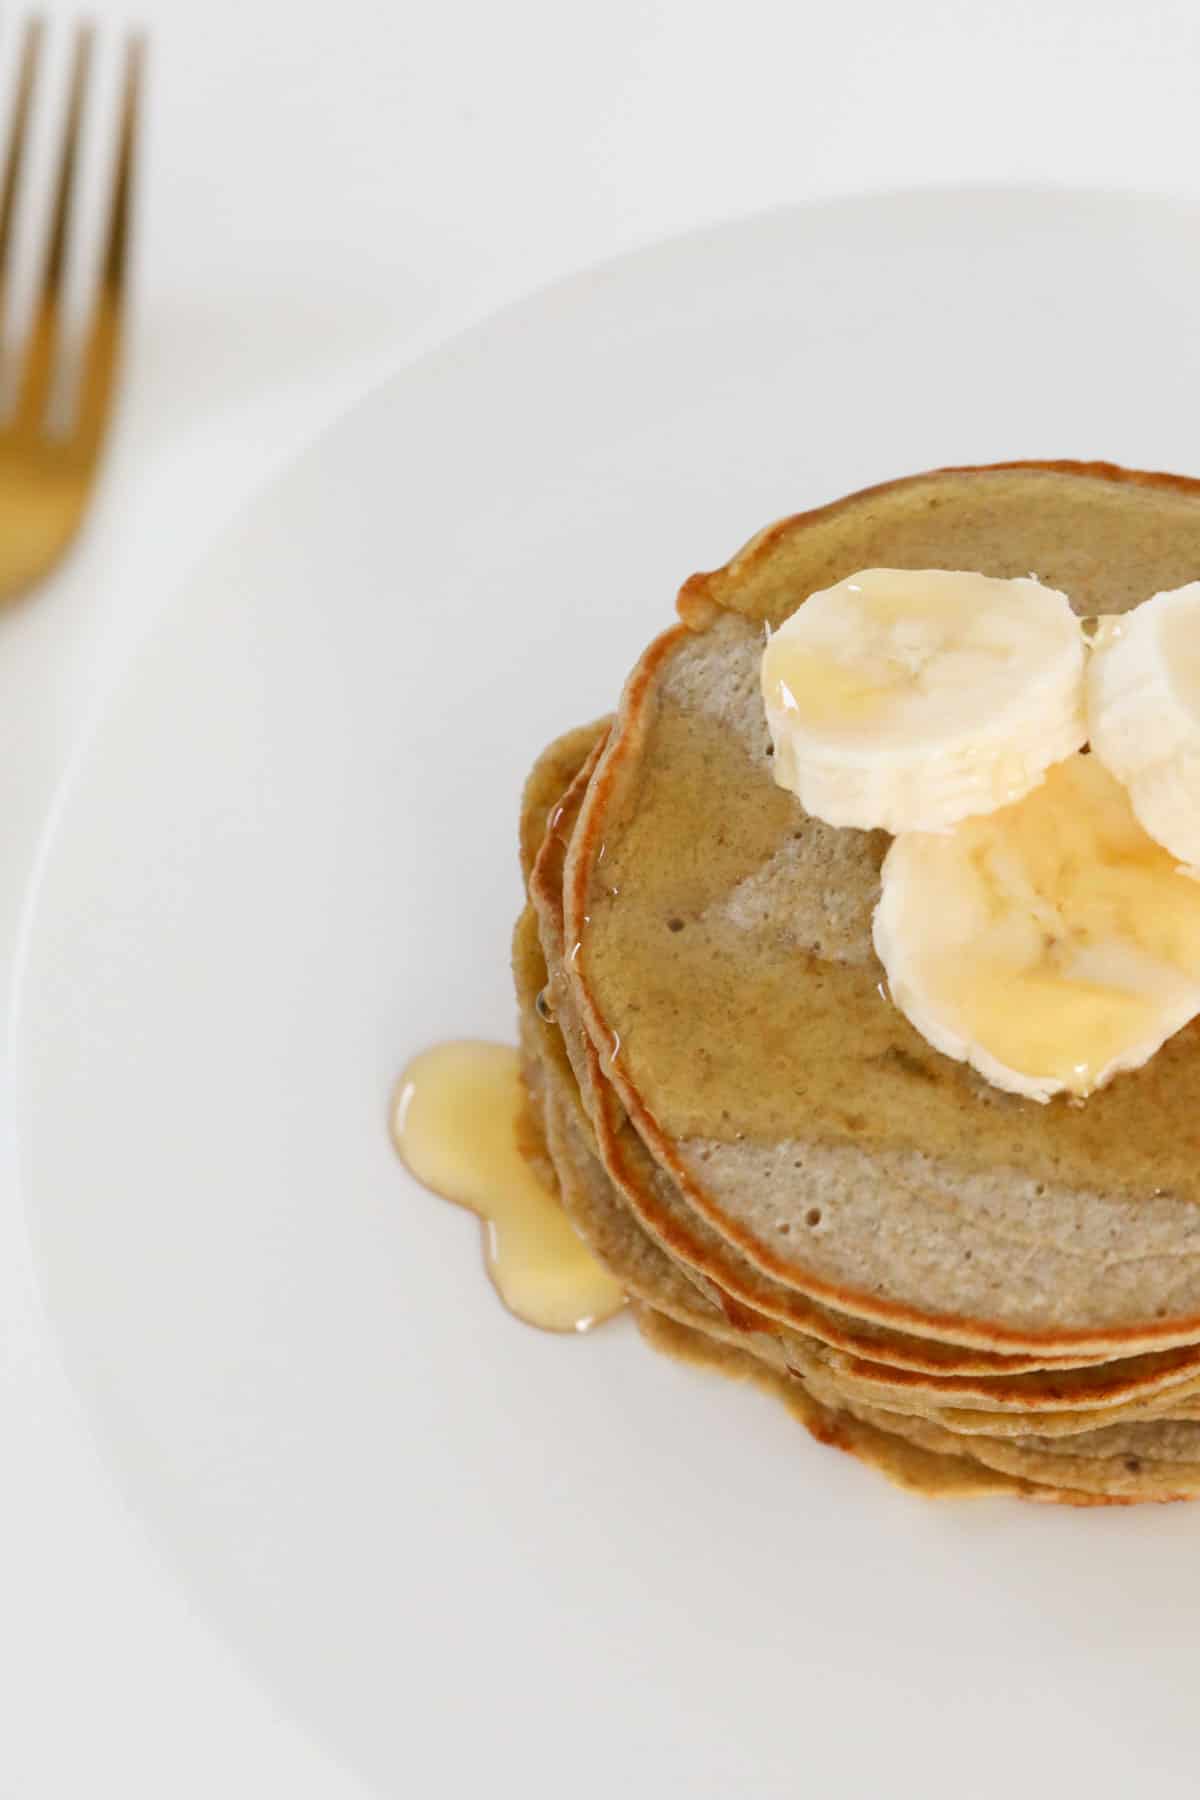 A stack of pancakes with syrup and sliced banana on a plate with a fork ready to eat.